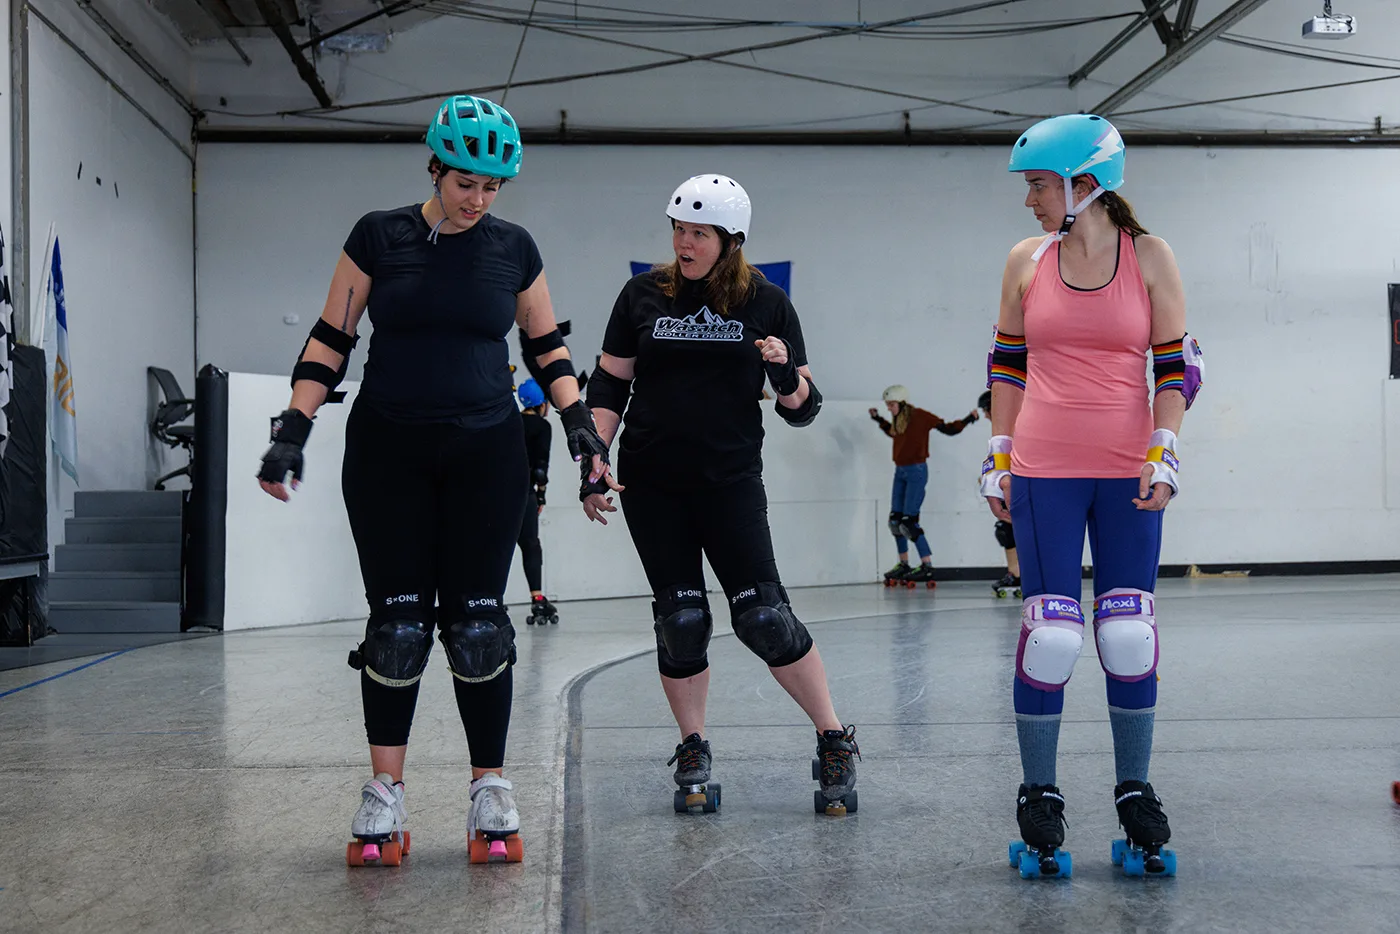 (L–R) Laura Benge, Yve Sojka and Jessica Ward at Wasatch Roller Derby’s weekly crash courses.